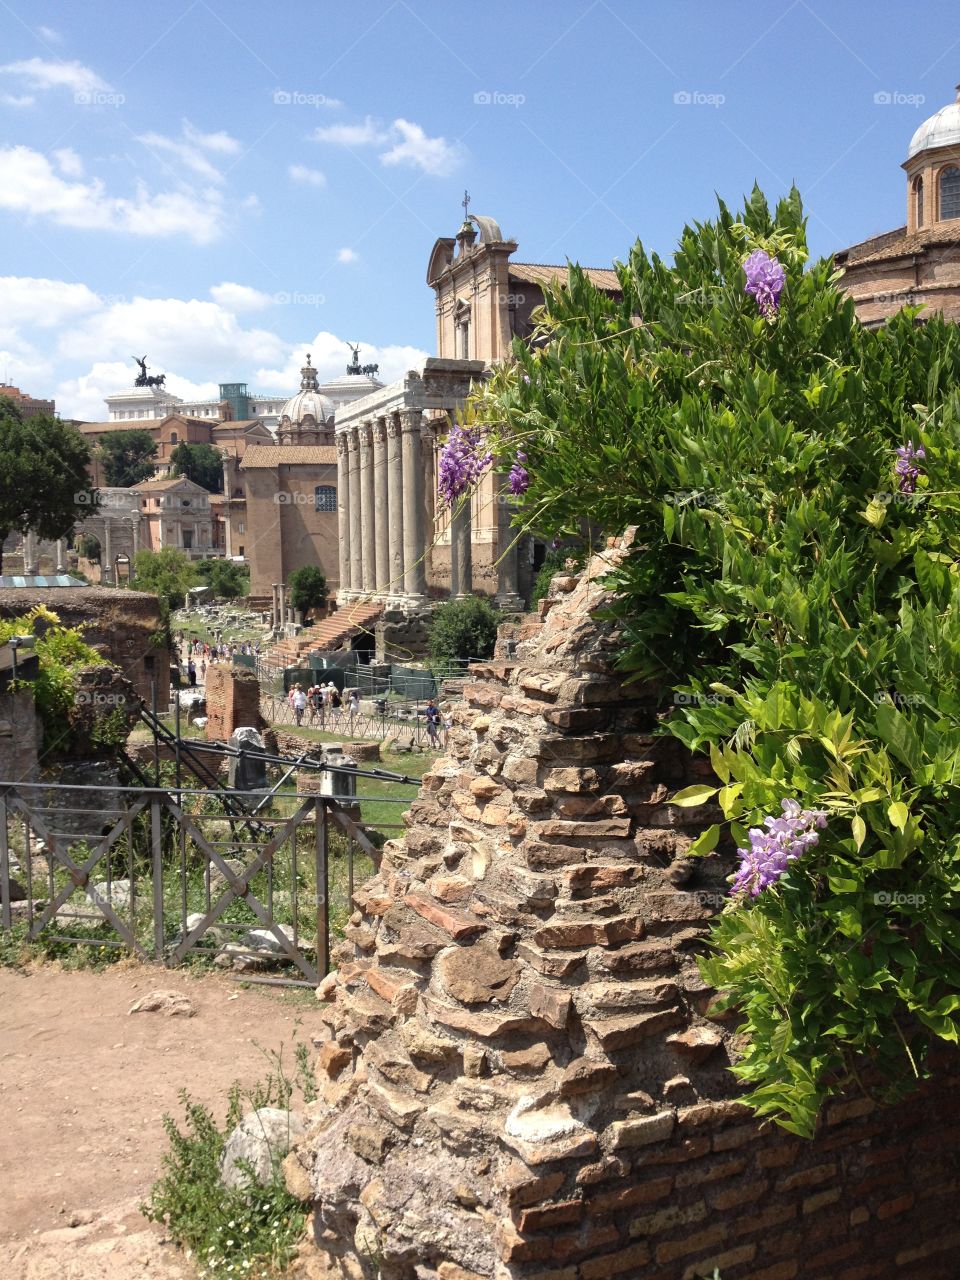 Flowers growing among the ruins of the Roman Forum in Rome, Italy